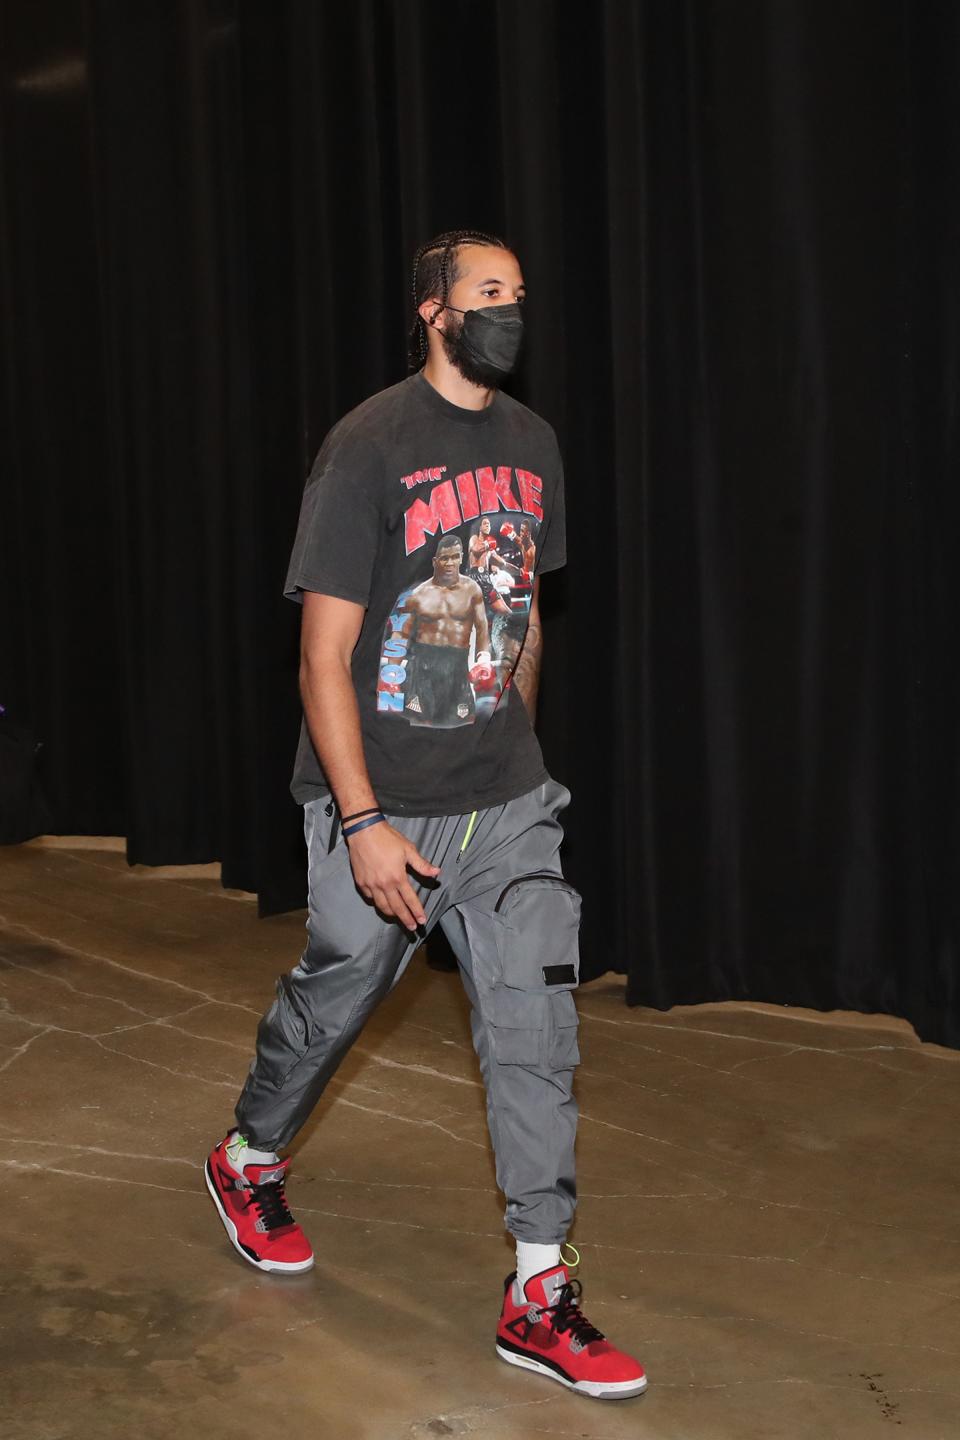 Michael Carter-Williams wearing a T-shirt for a Mike Tyson fight…that never happened.